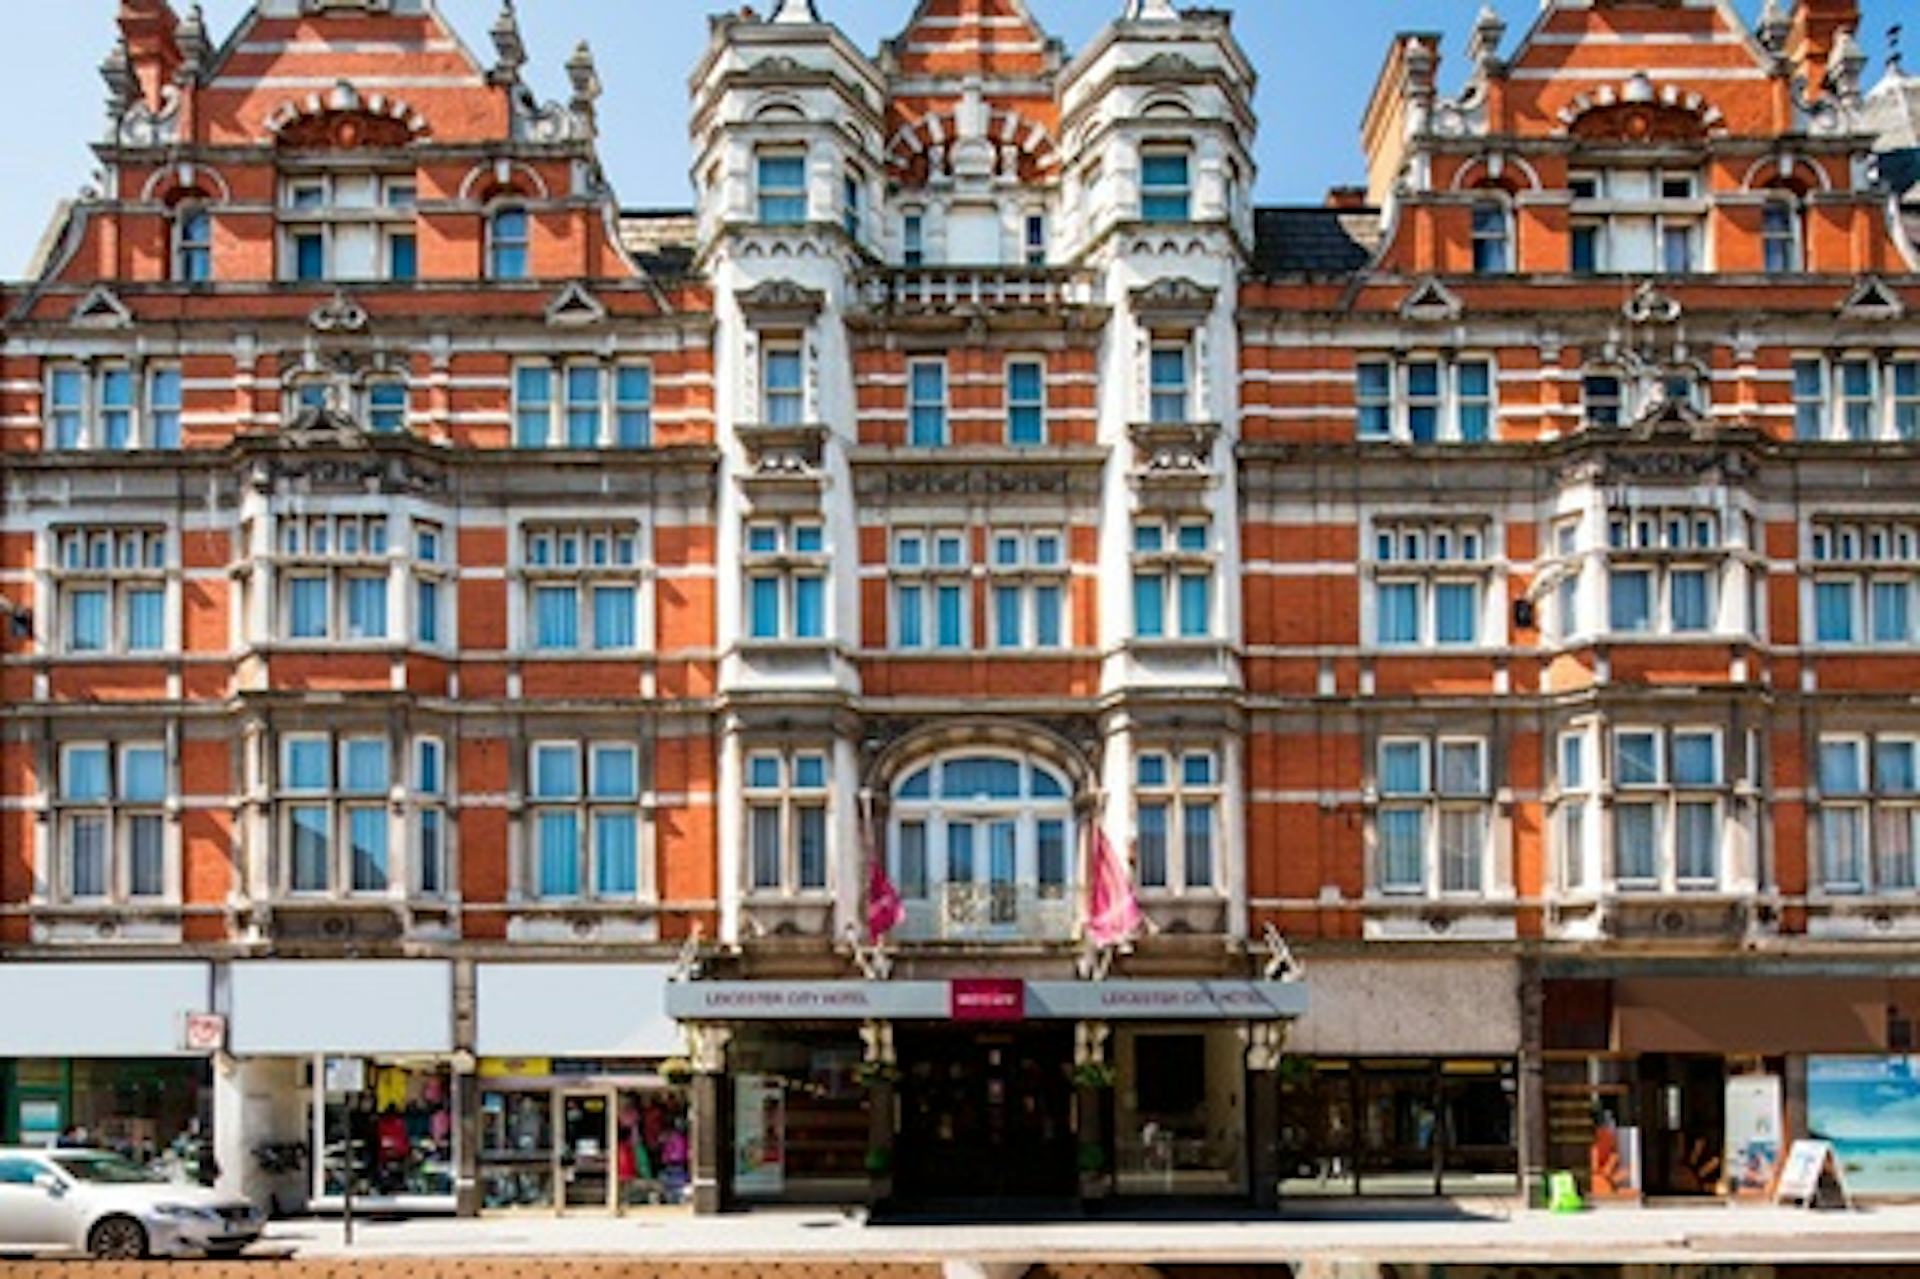 Two Night Break for Two at the Mercure Leicester The Grand Hotel